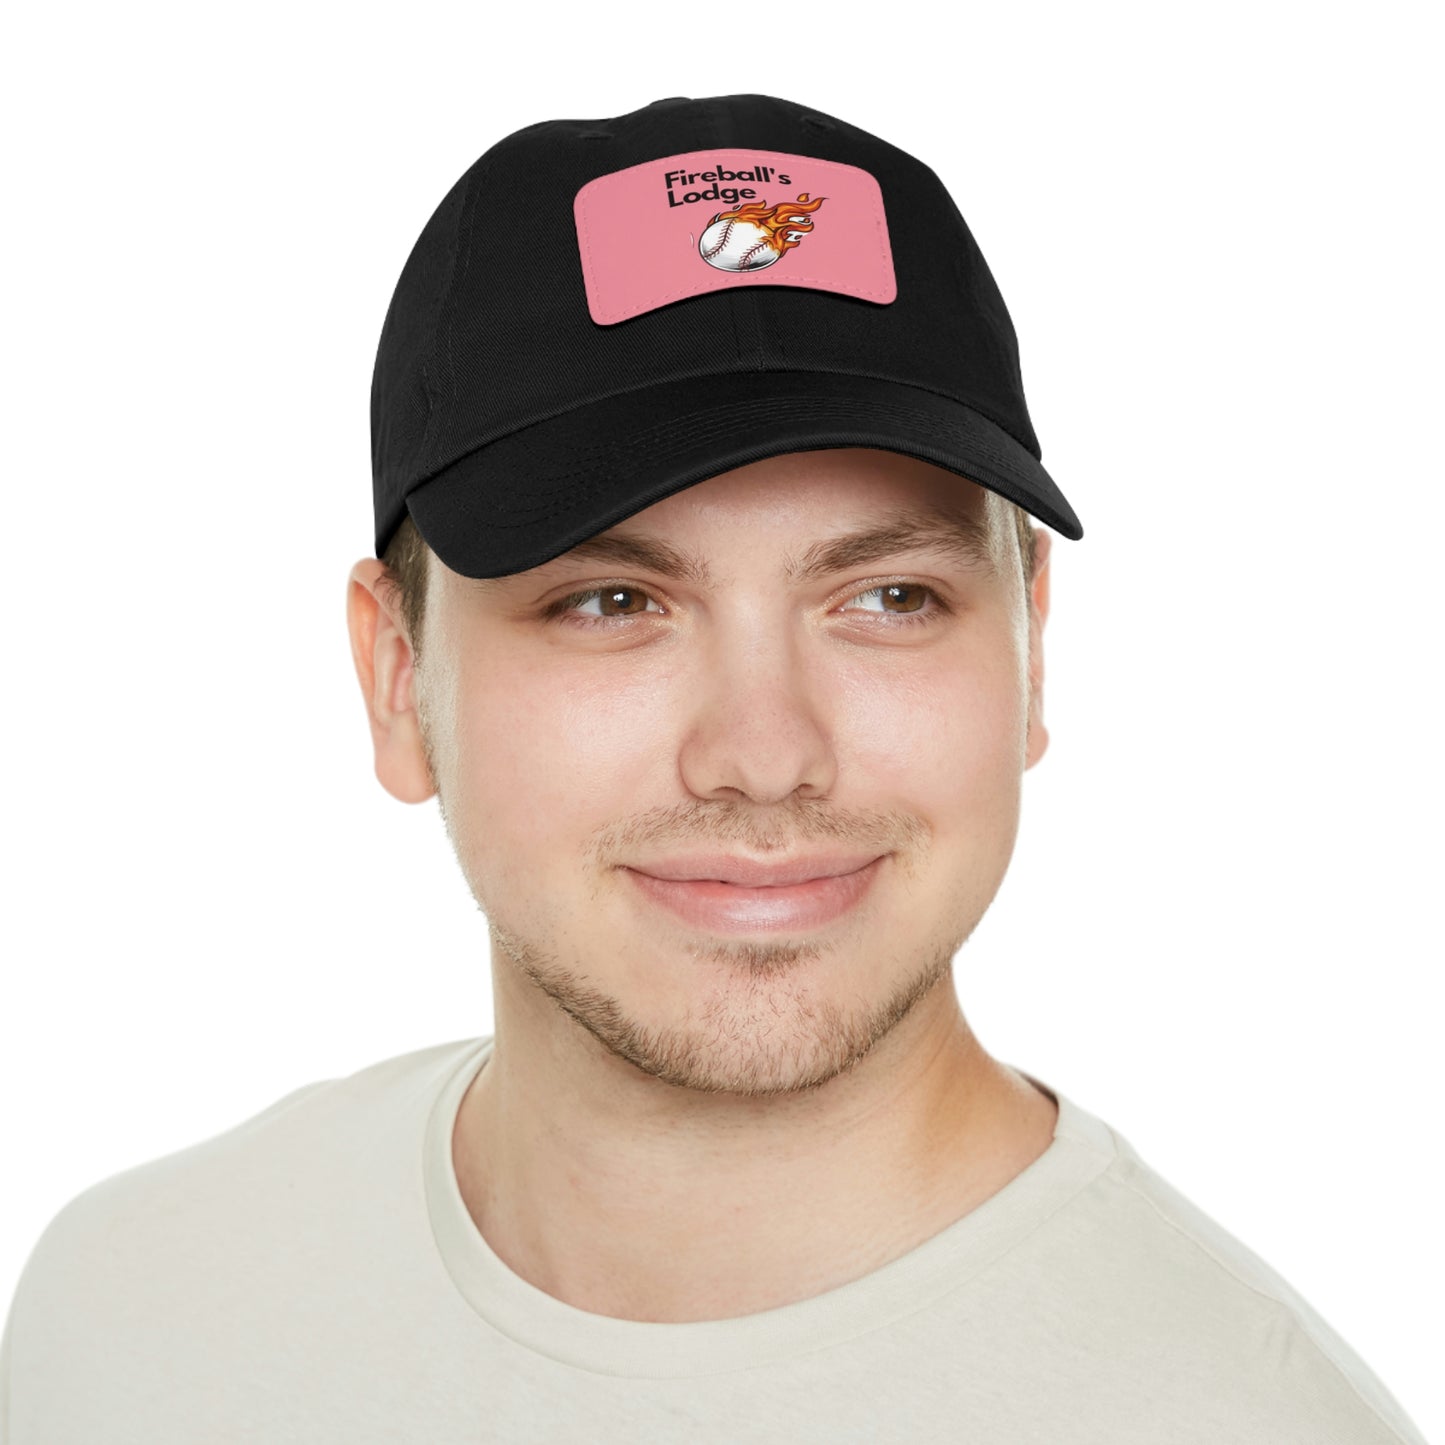 Fireballs Lodge Dad Hat with Leather Patch (Rectangle)